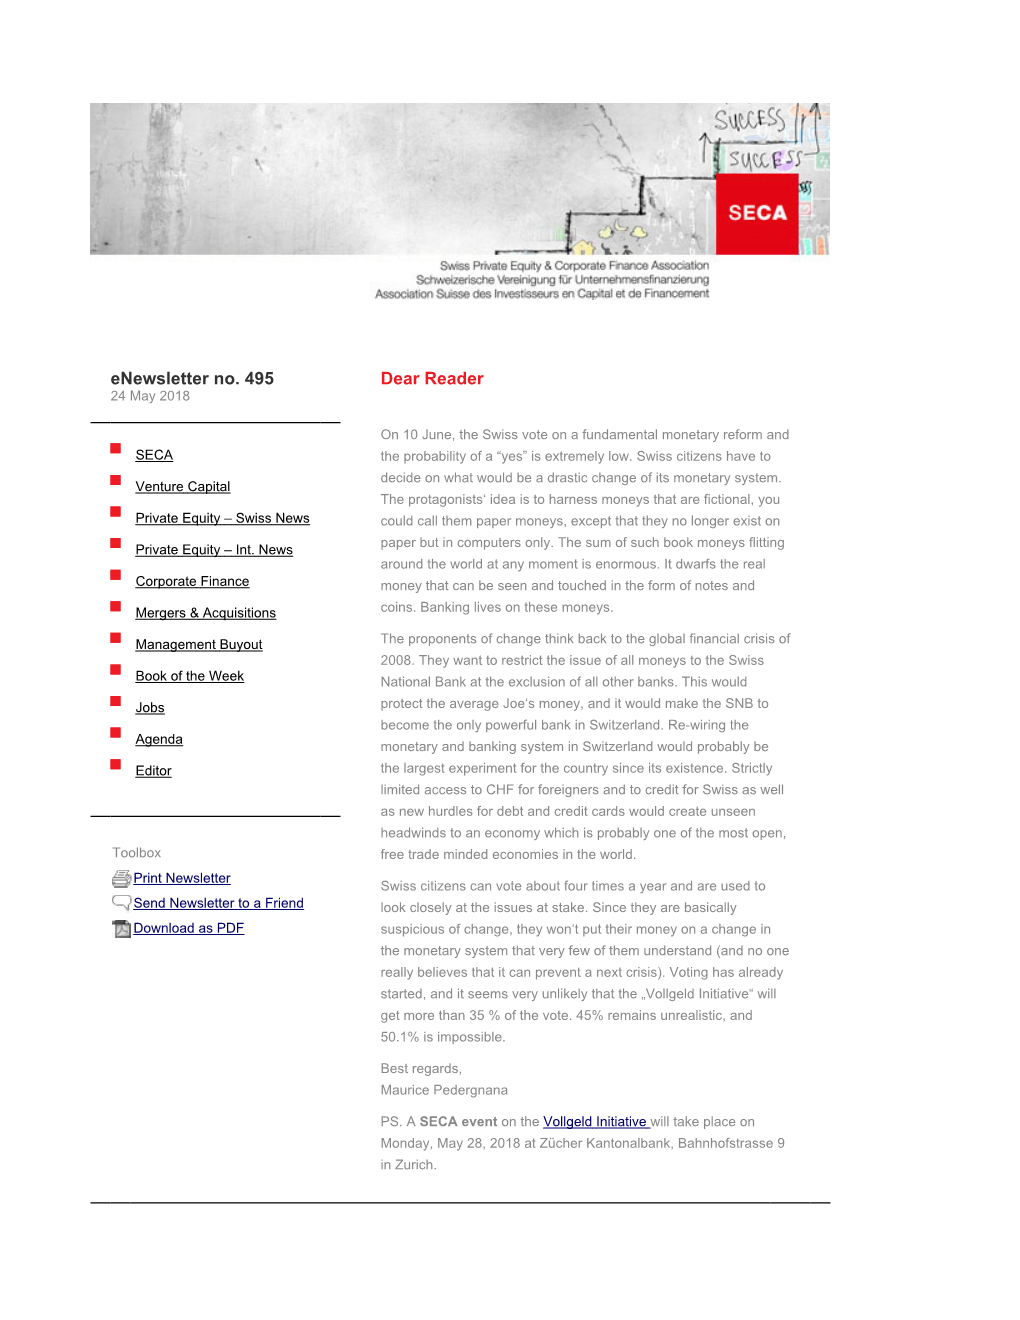 Enewsletter No. 495 | SECA | Swiss Private Equity & Corporate Finance